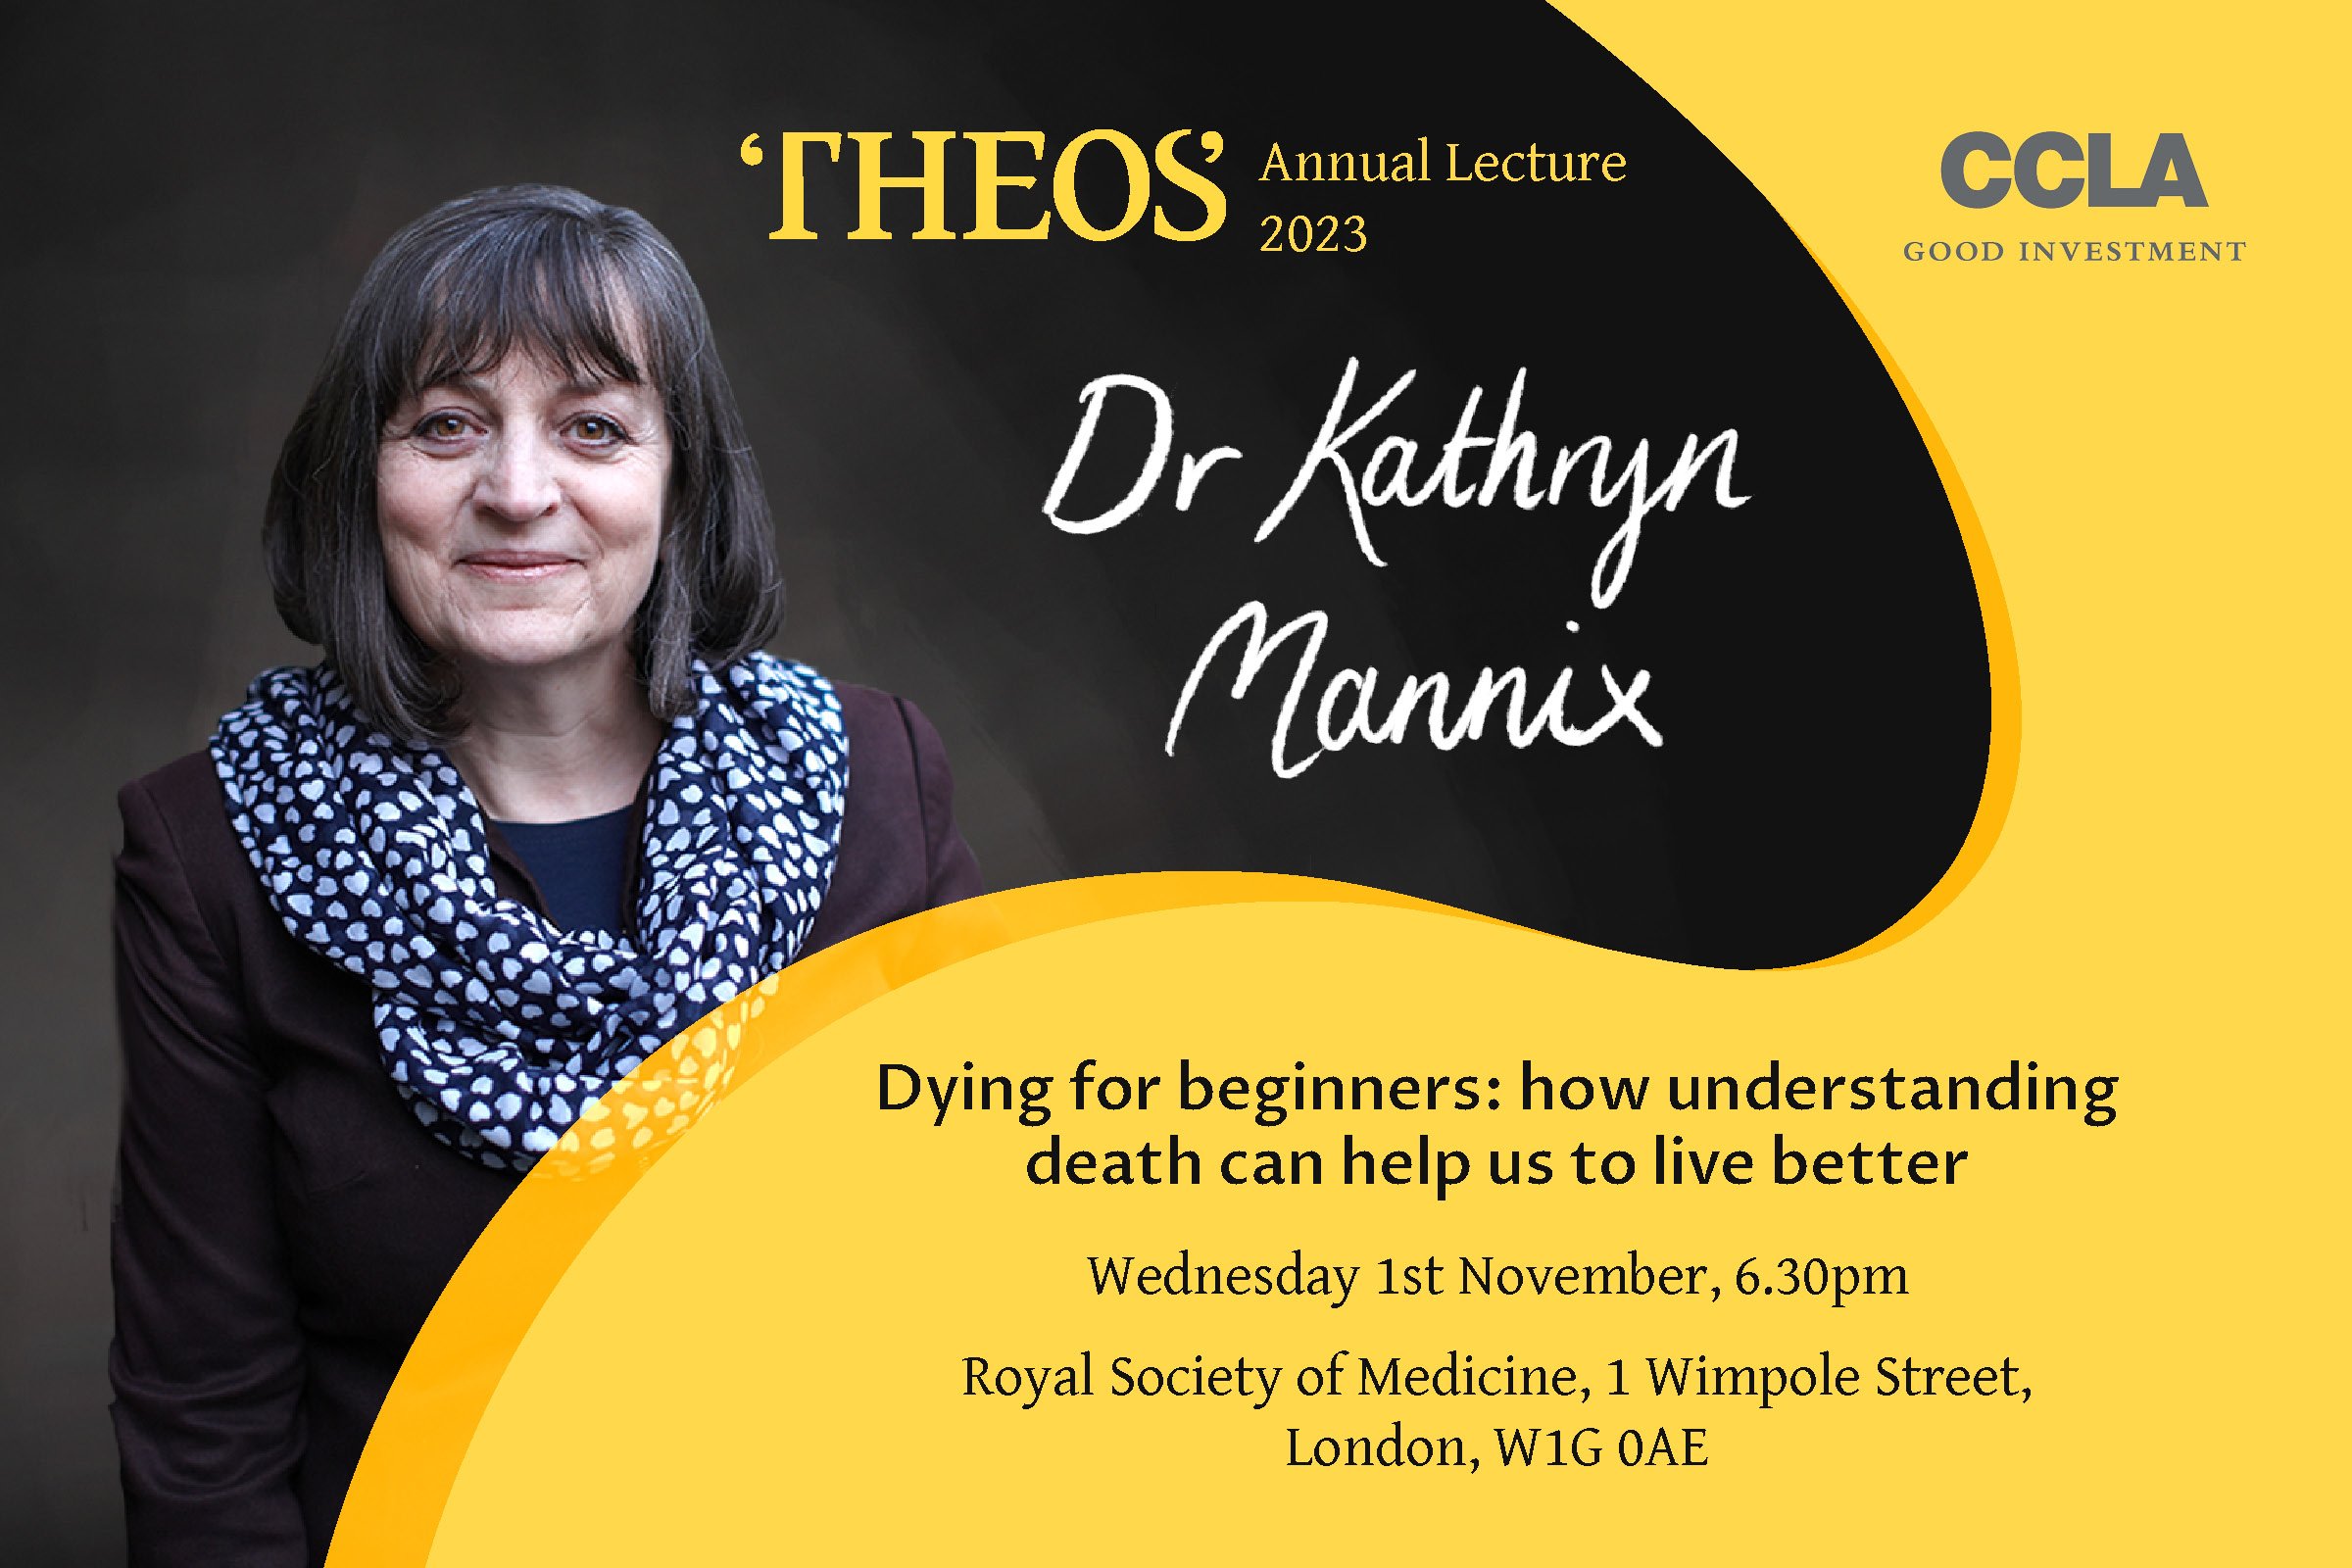 Dying for beginners: how understanding death can help us to live better